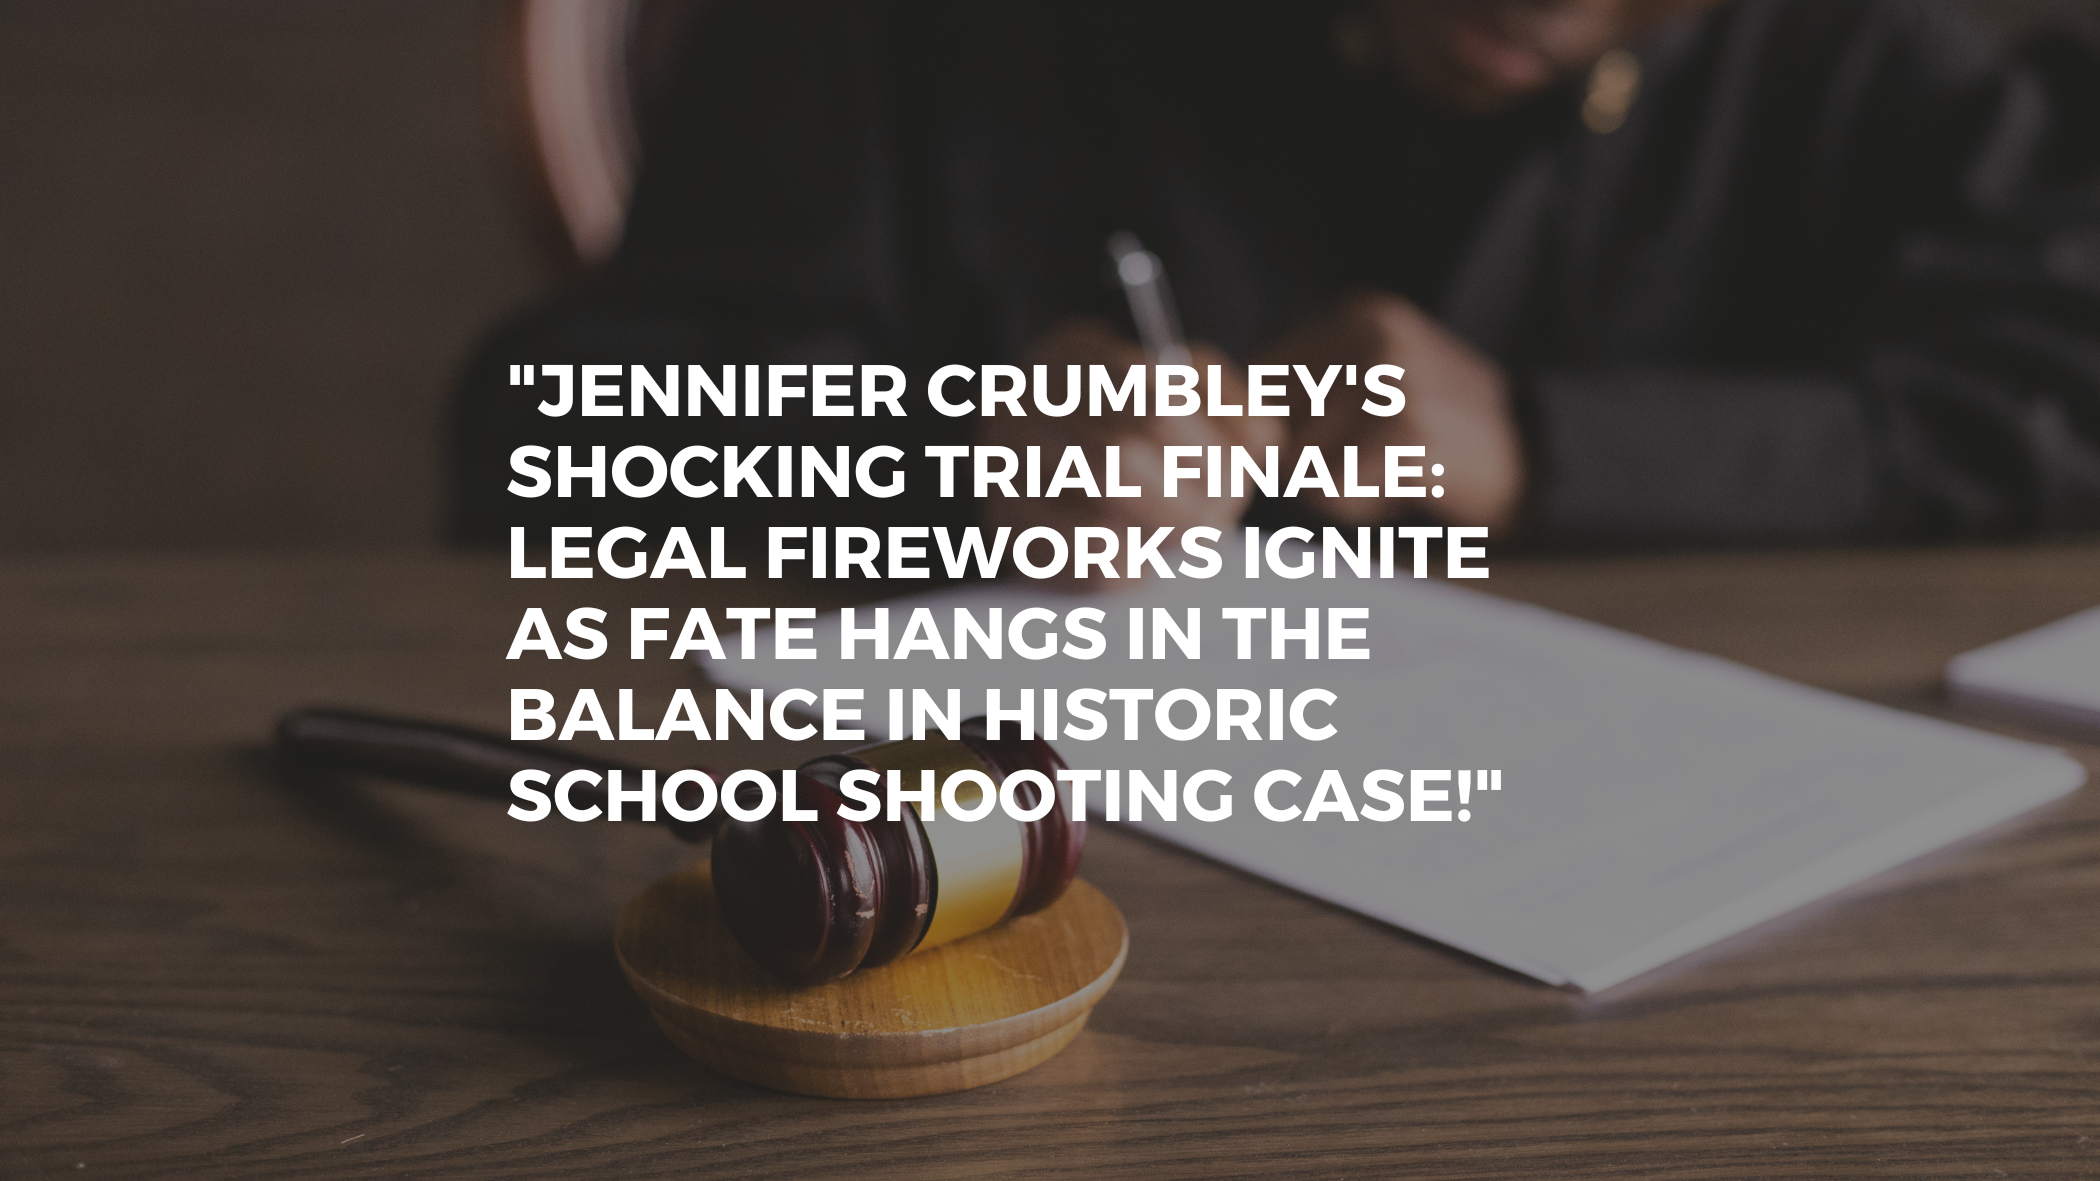 "Jennifer Crumbley's Shocking Trial Finale: Legal Fireworks Ignite as Fate Hangs in the Balance in Historic School Shooting Case!"